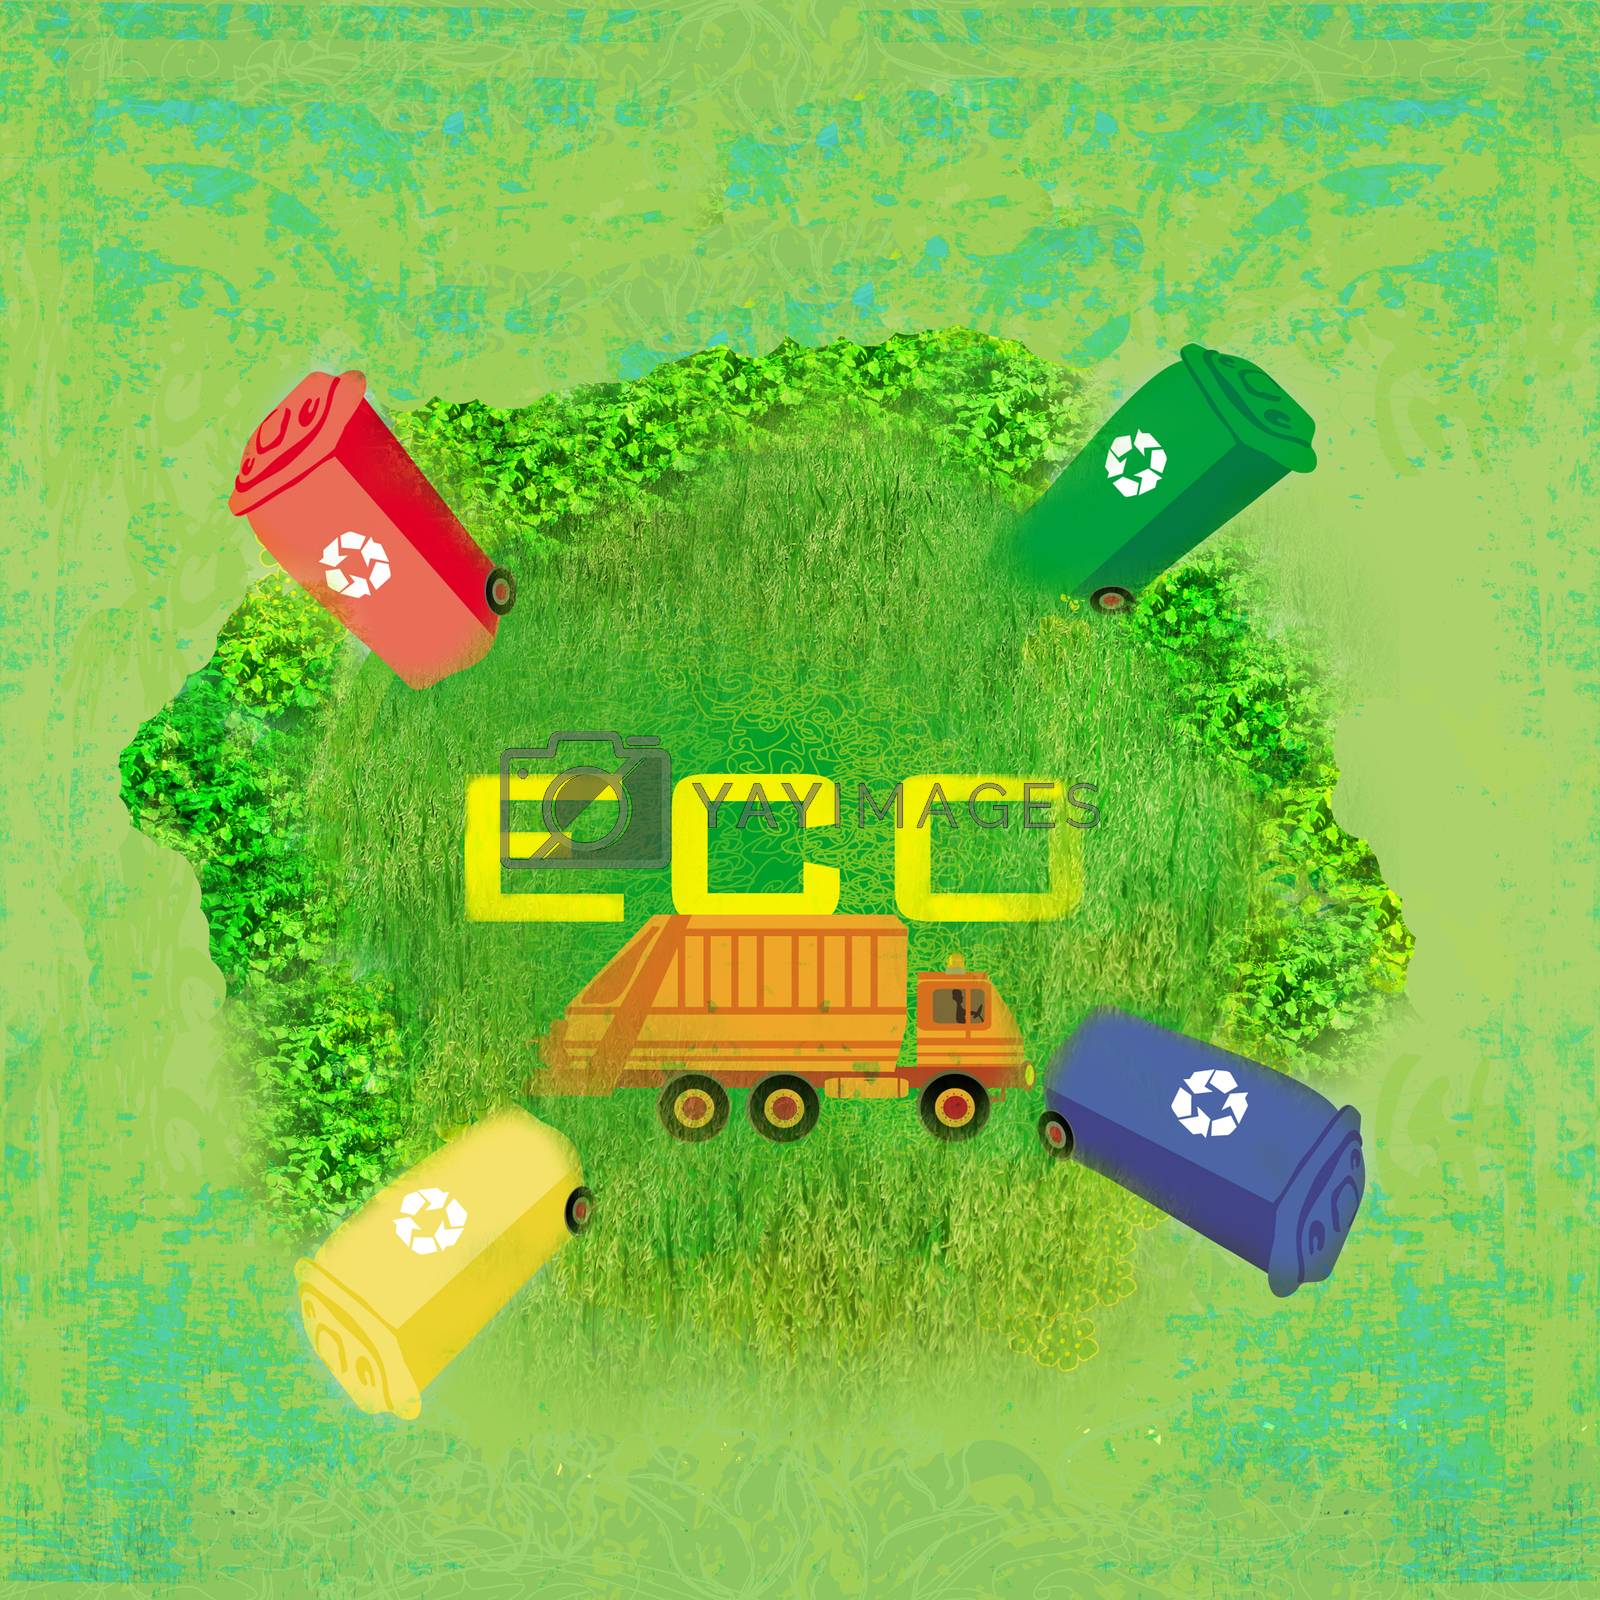 Royalty free image of ecology card design, segregation of garbage  by JackyBrown